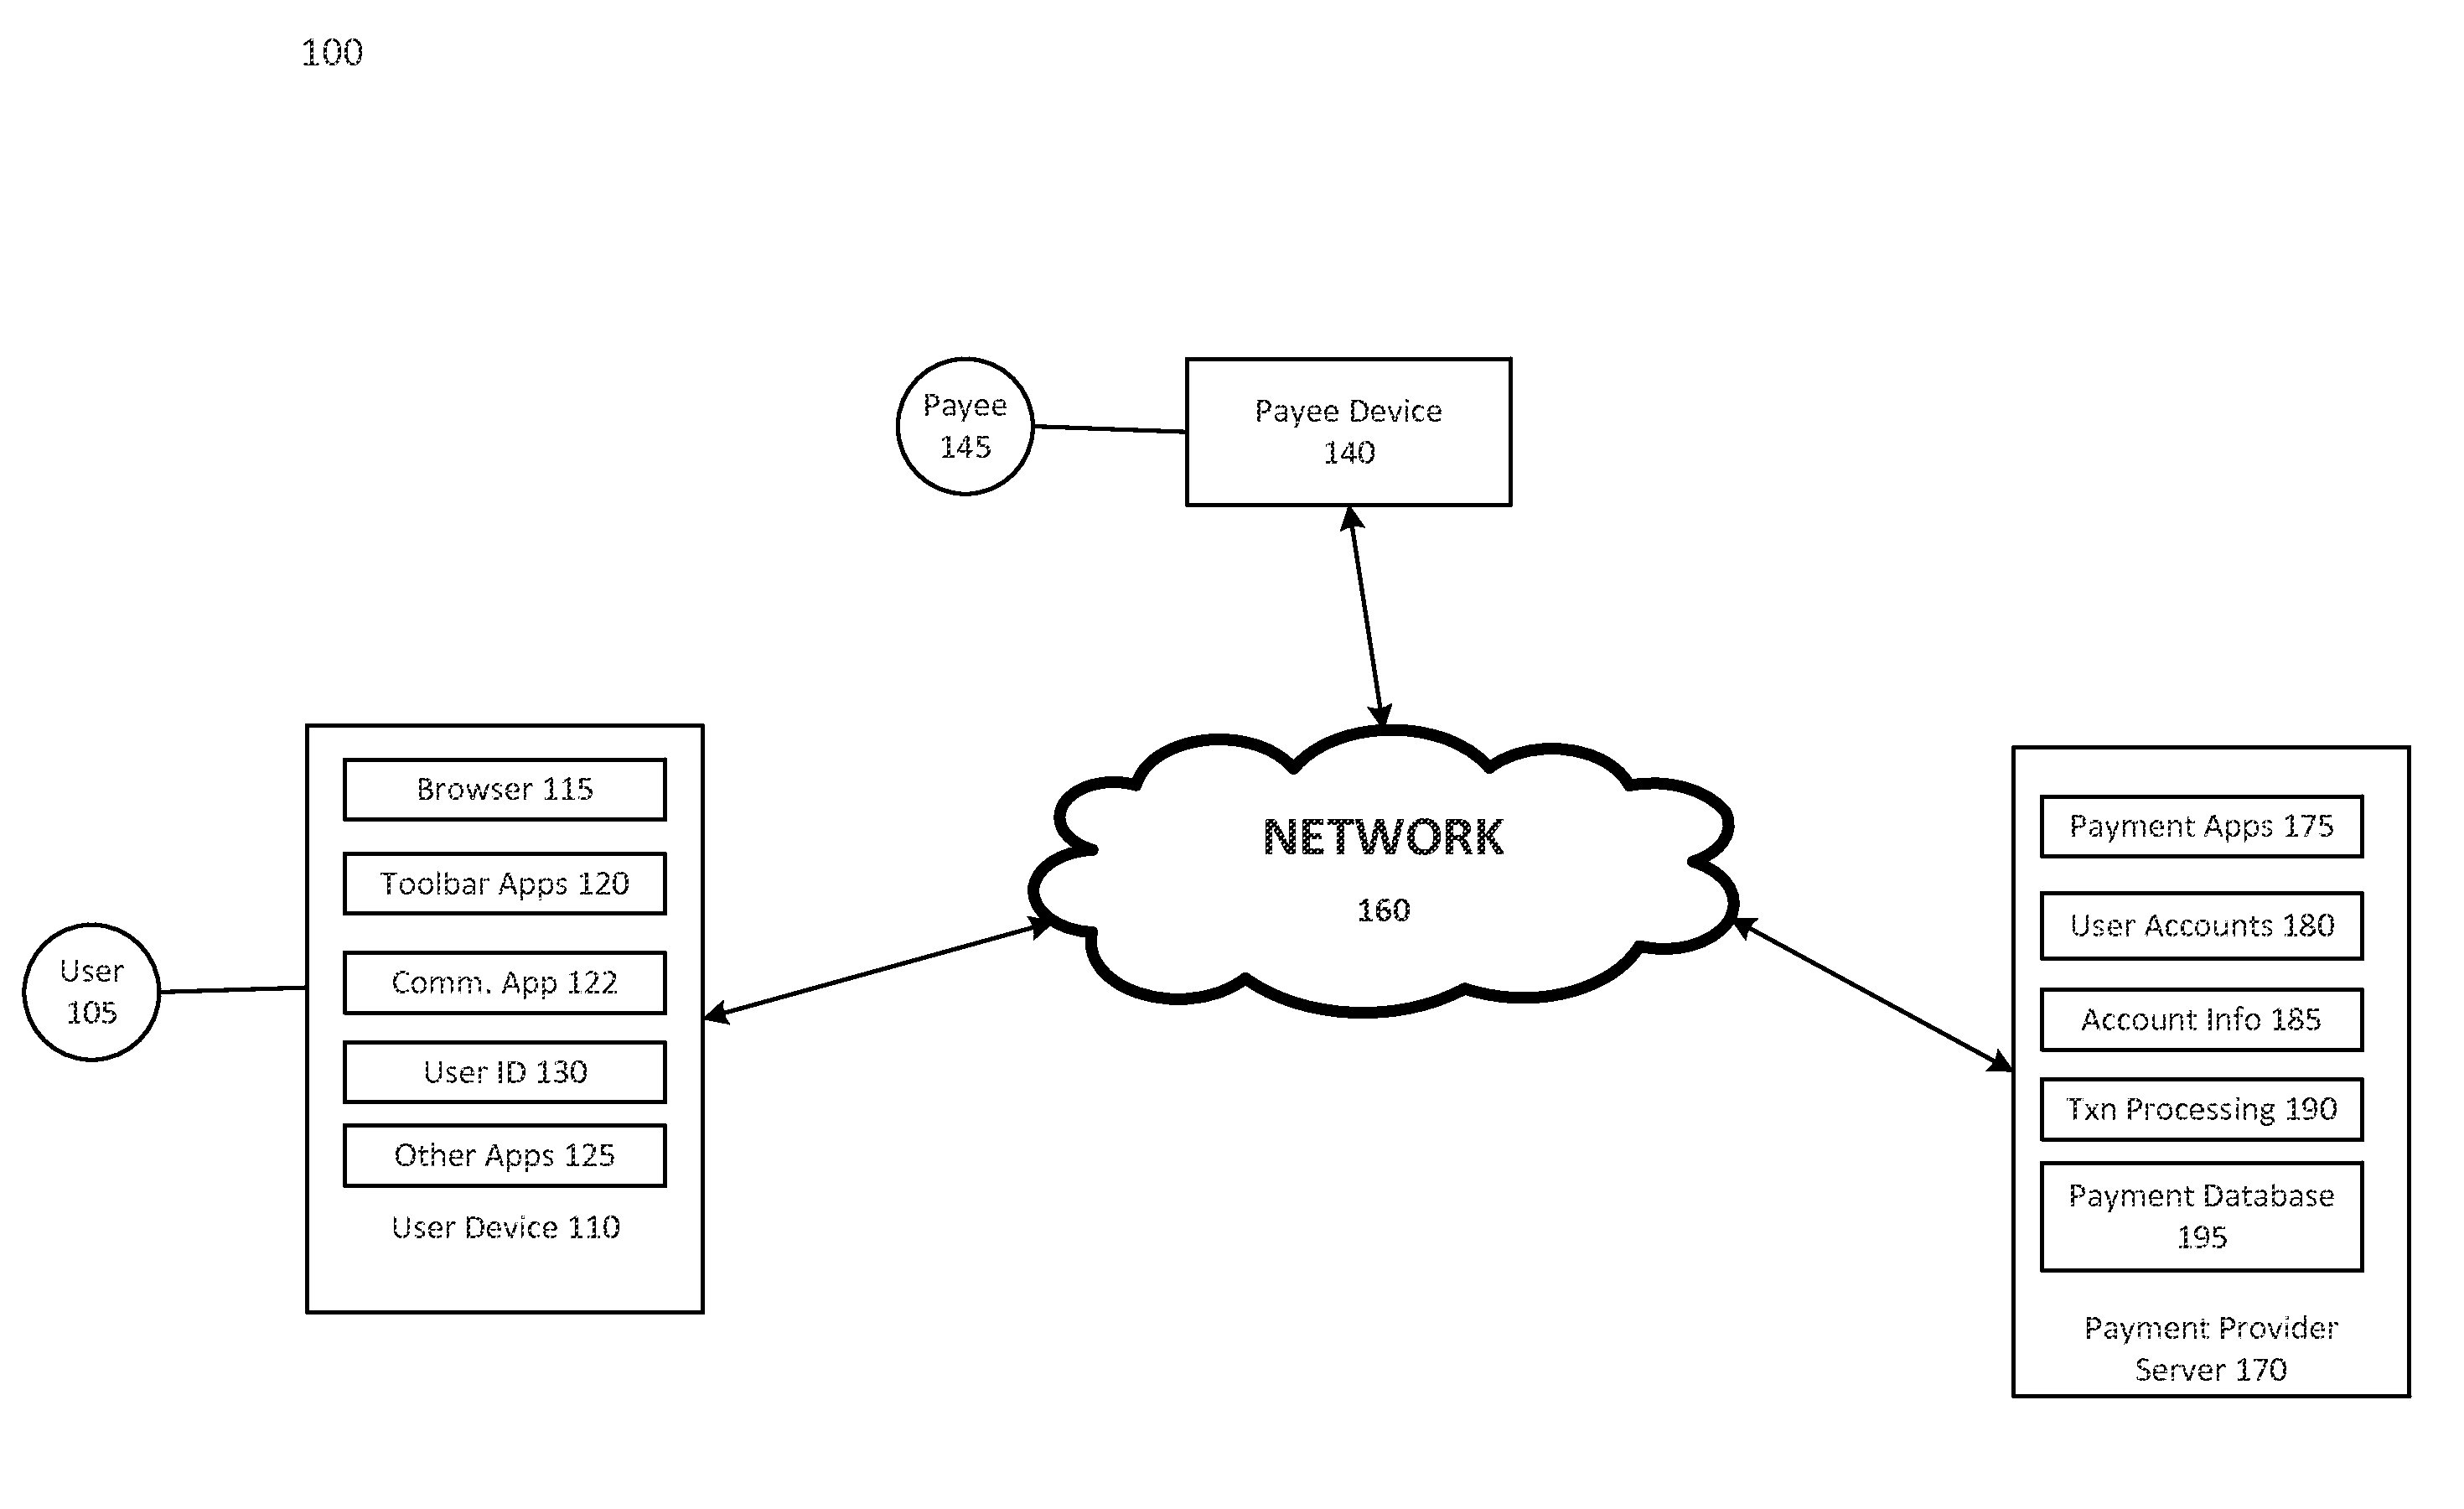 Systems and methods for implementing transactions based on facial recognition